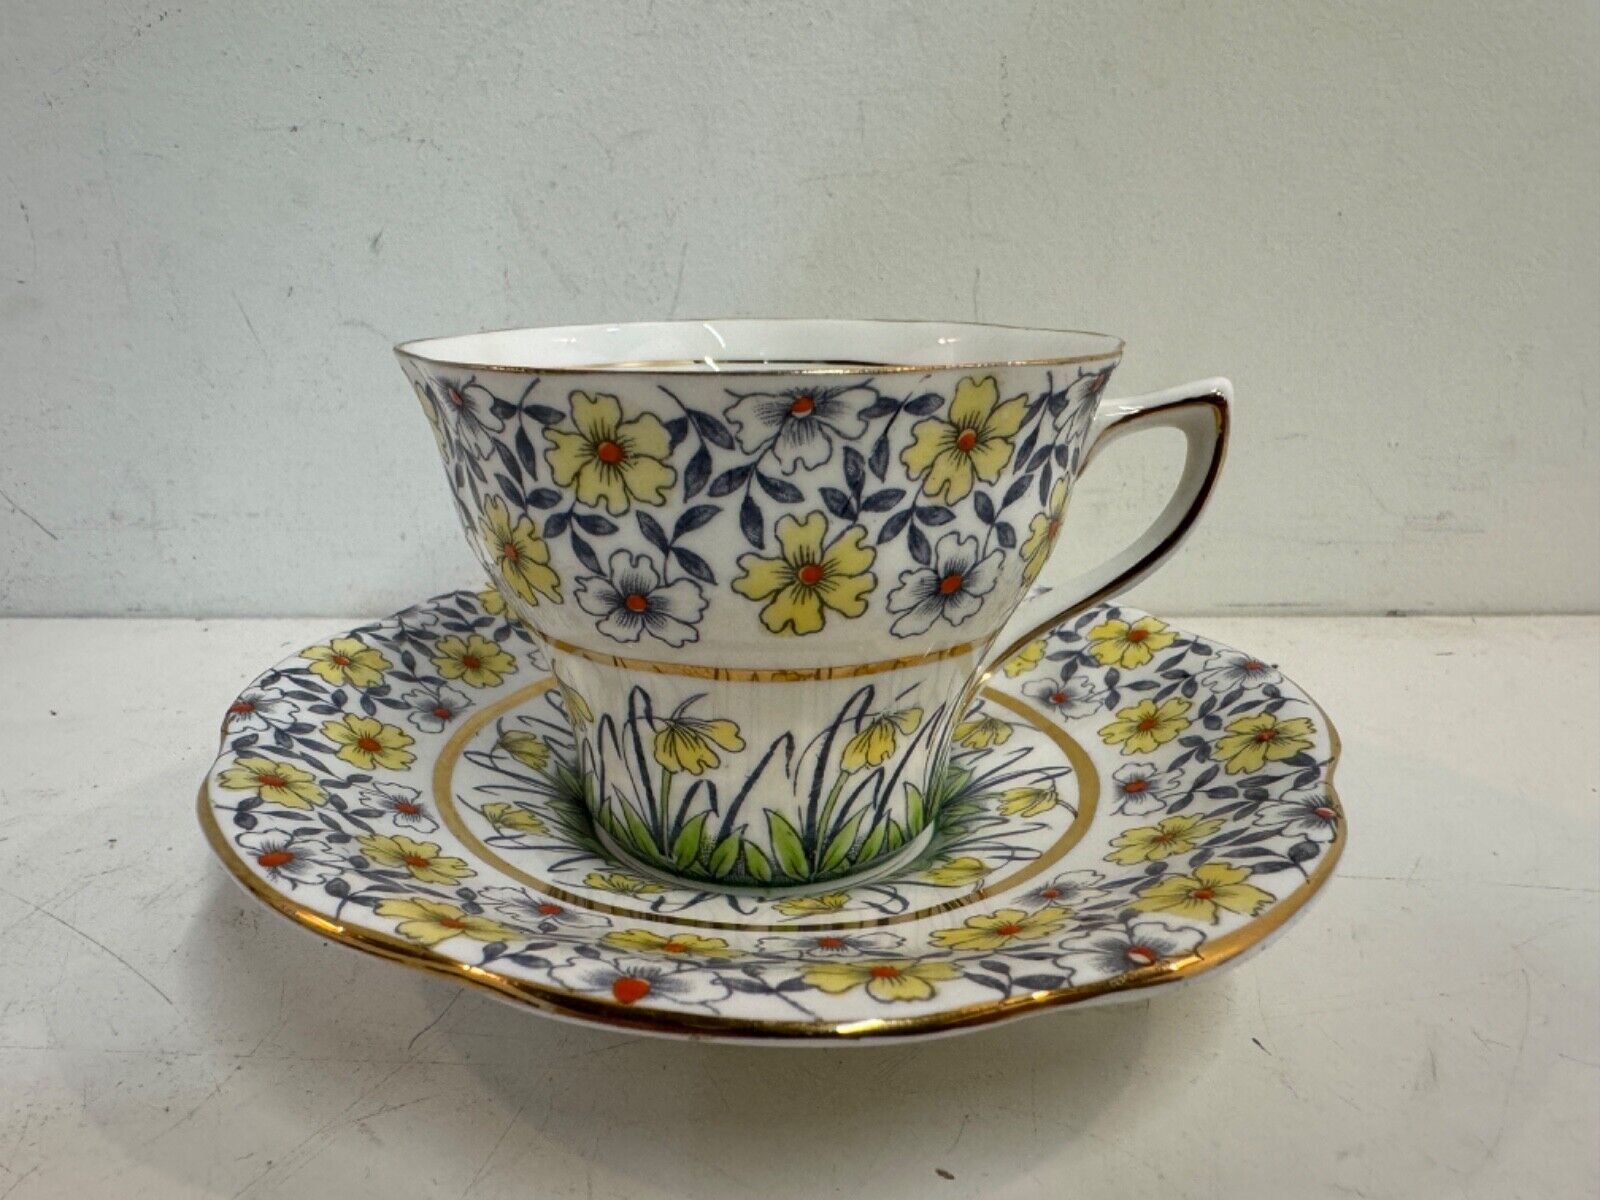 Vintage Rosina Porcelain Cup and Saucer with Yellow Floral Decorations